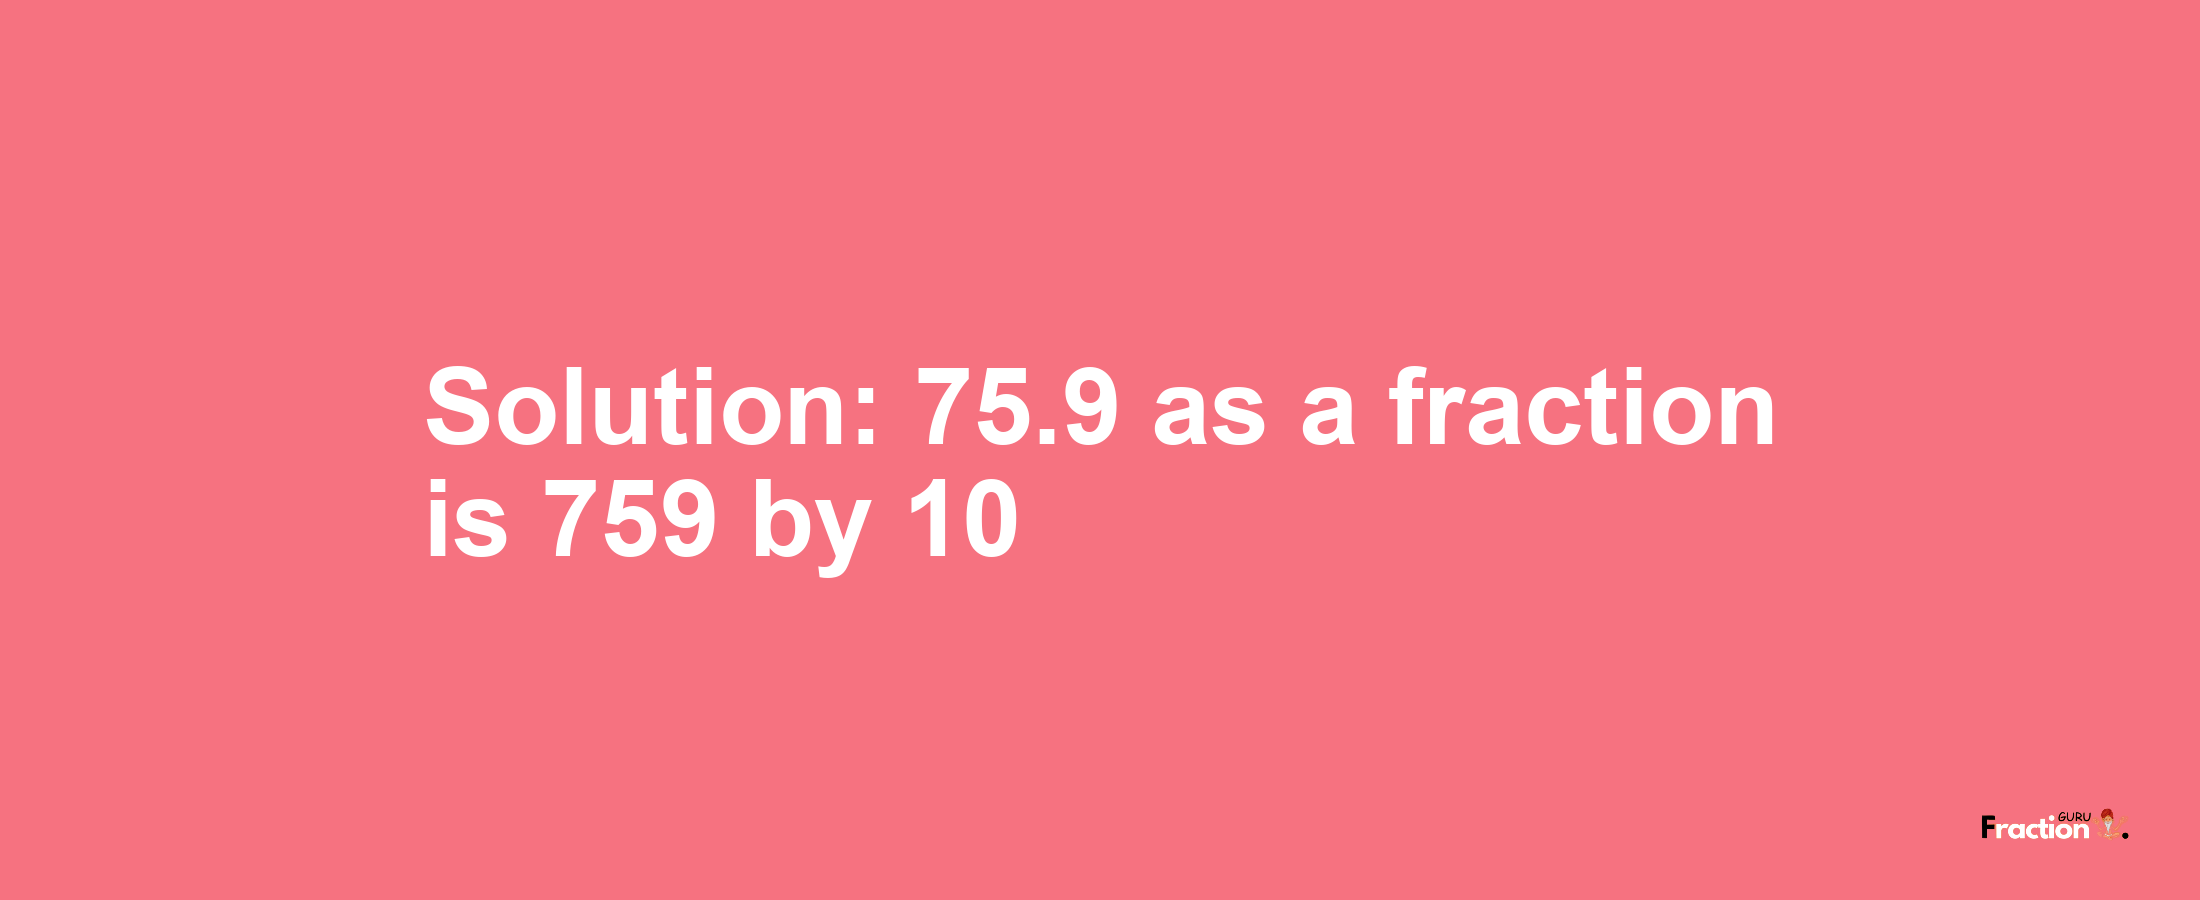 Solution:75.9 as a fraction is 759/10